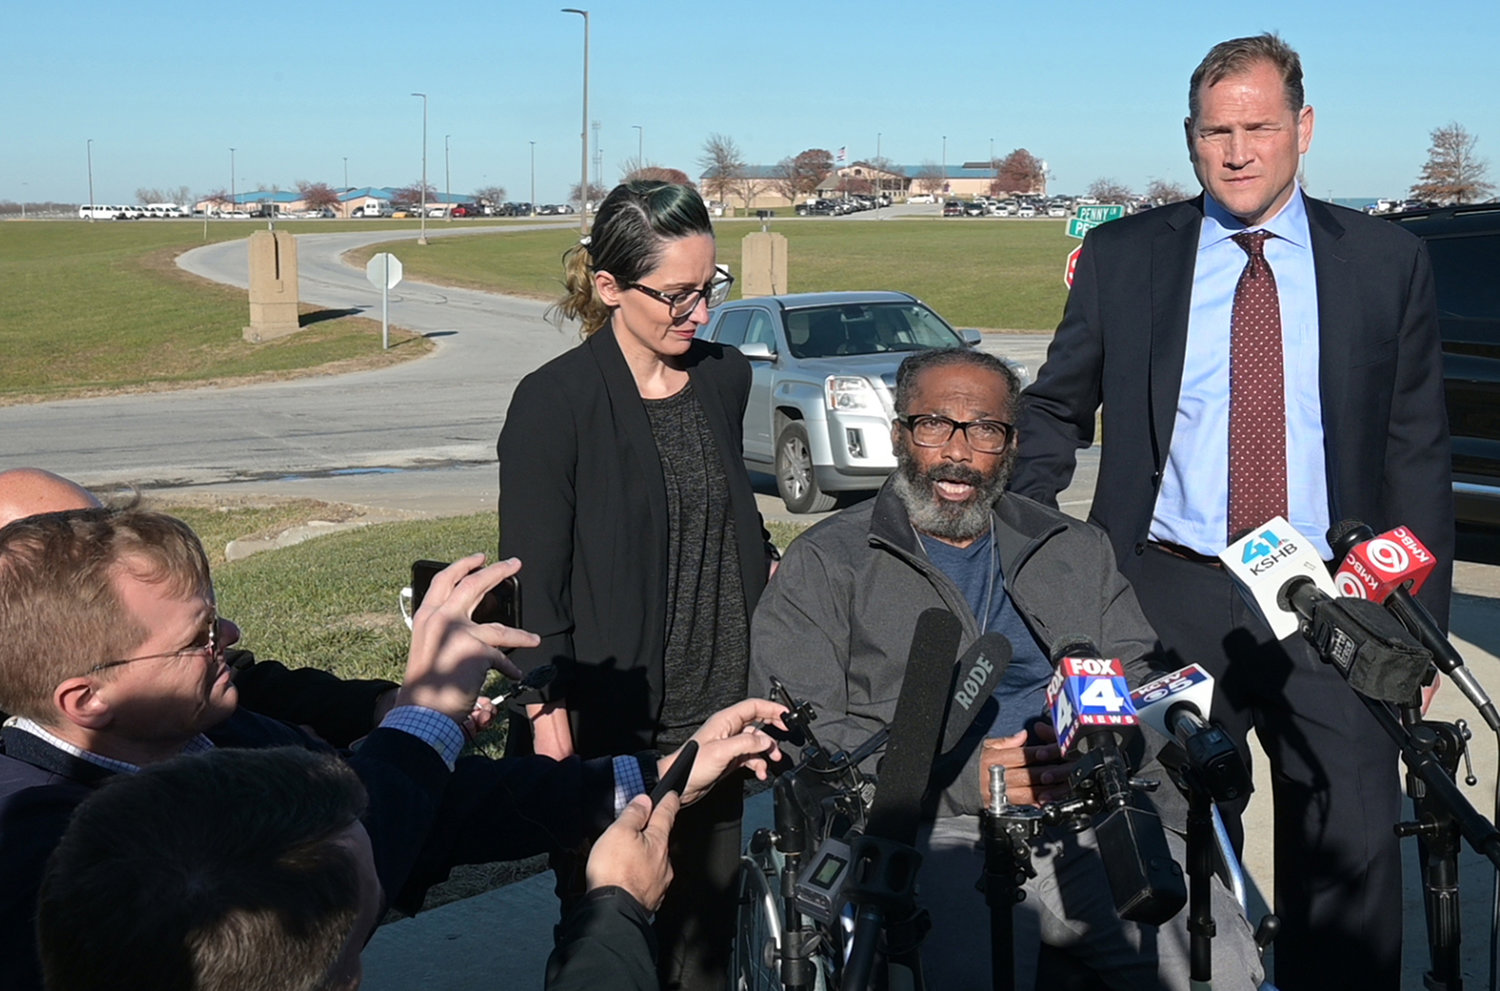 “They knew from day one that I didn’t commit this crime,” Kevin Strickland said of police and prosecutors as his lawyers Tricia Rojo Bushnell, left, an attorney with the Midwest Innocence Project and attorney Robert Hoffman, right, of Bryan Cave Leighton Paisner, transported Strickland to meet the media after he was freed from prison Tuesday, Nov. 23, 2021, in Cameron, Missouri. Strickland spent 43 years in prison for a wrongful incarceration until a judge vacated his conviction for a 1978 triple murder. (Tammy Ljungblad/Kansas City Star/TNS)